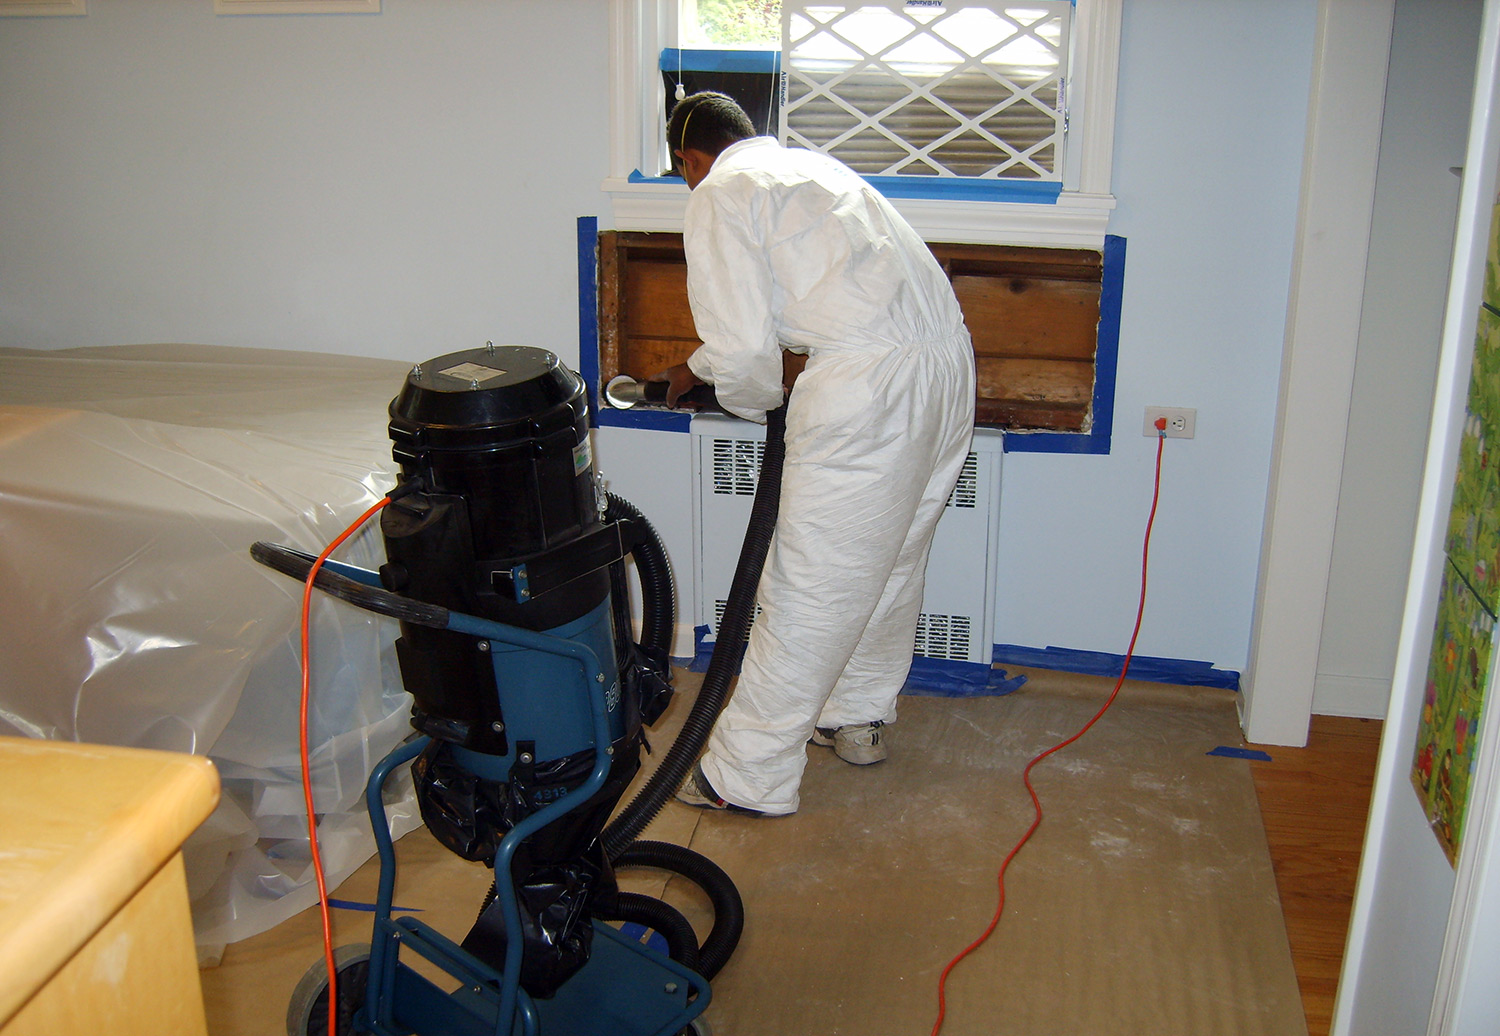 TERS water damage restoration expert decontaminating mold and moisture below the leaking window